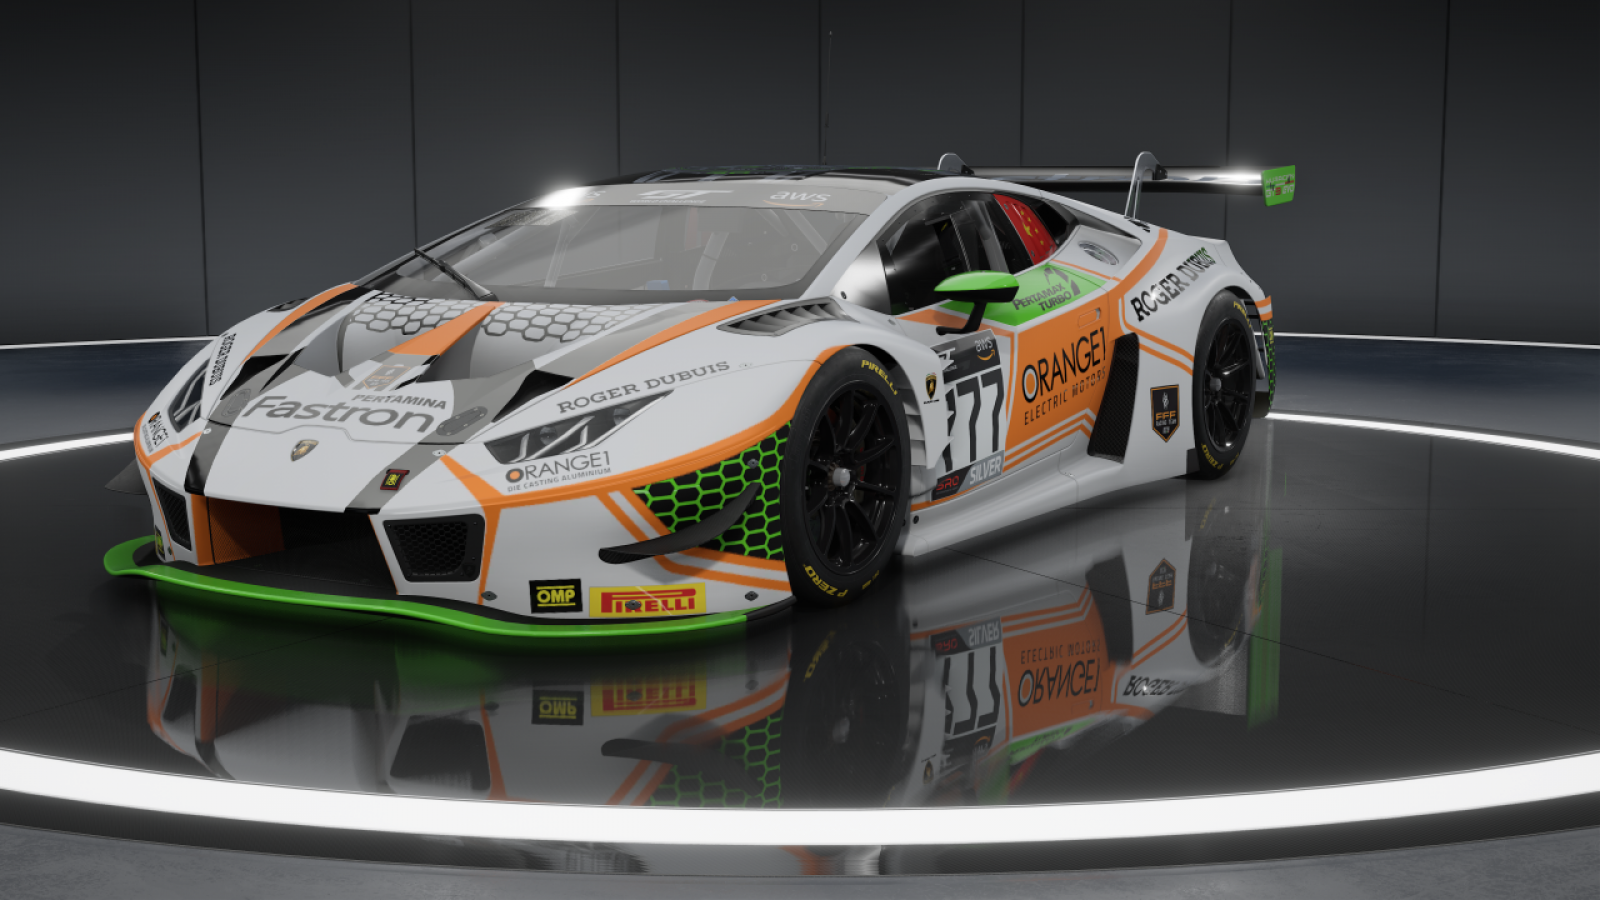 FFF Racing Team by ACM announces “FFF Award” for online drivers in the SRO E-Sports GT Series Championship